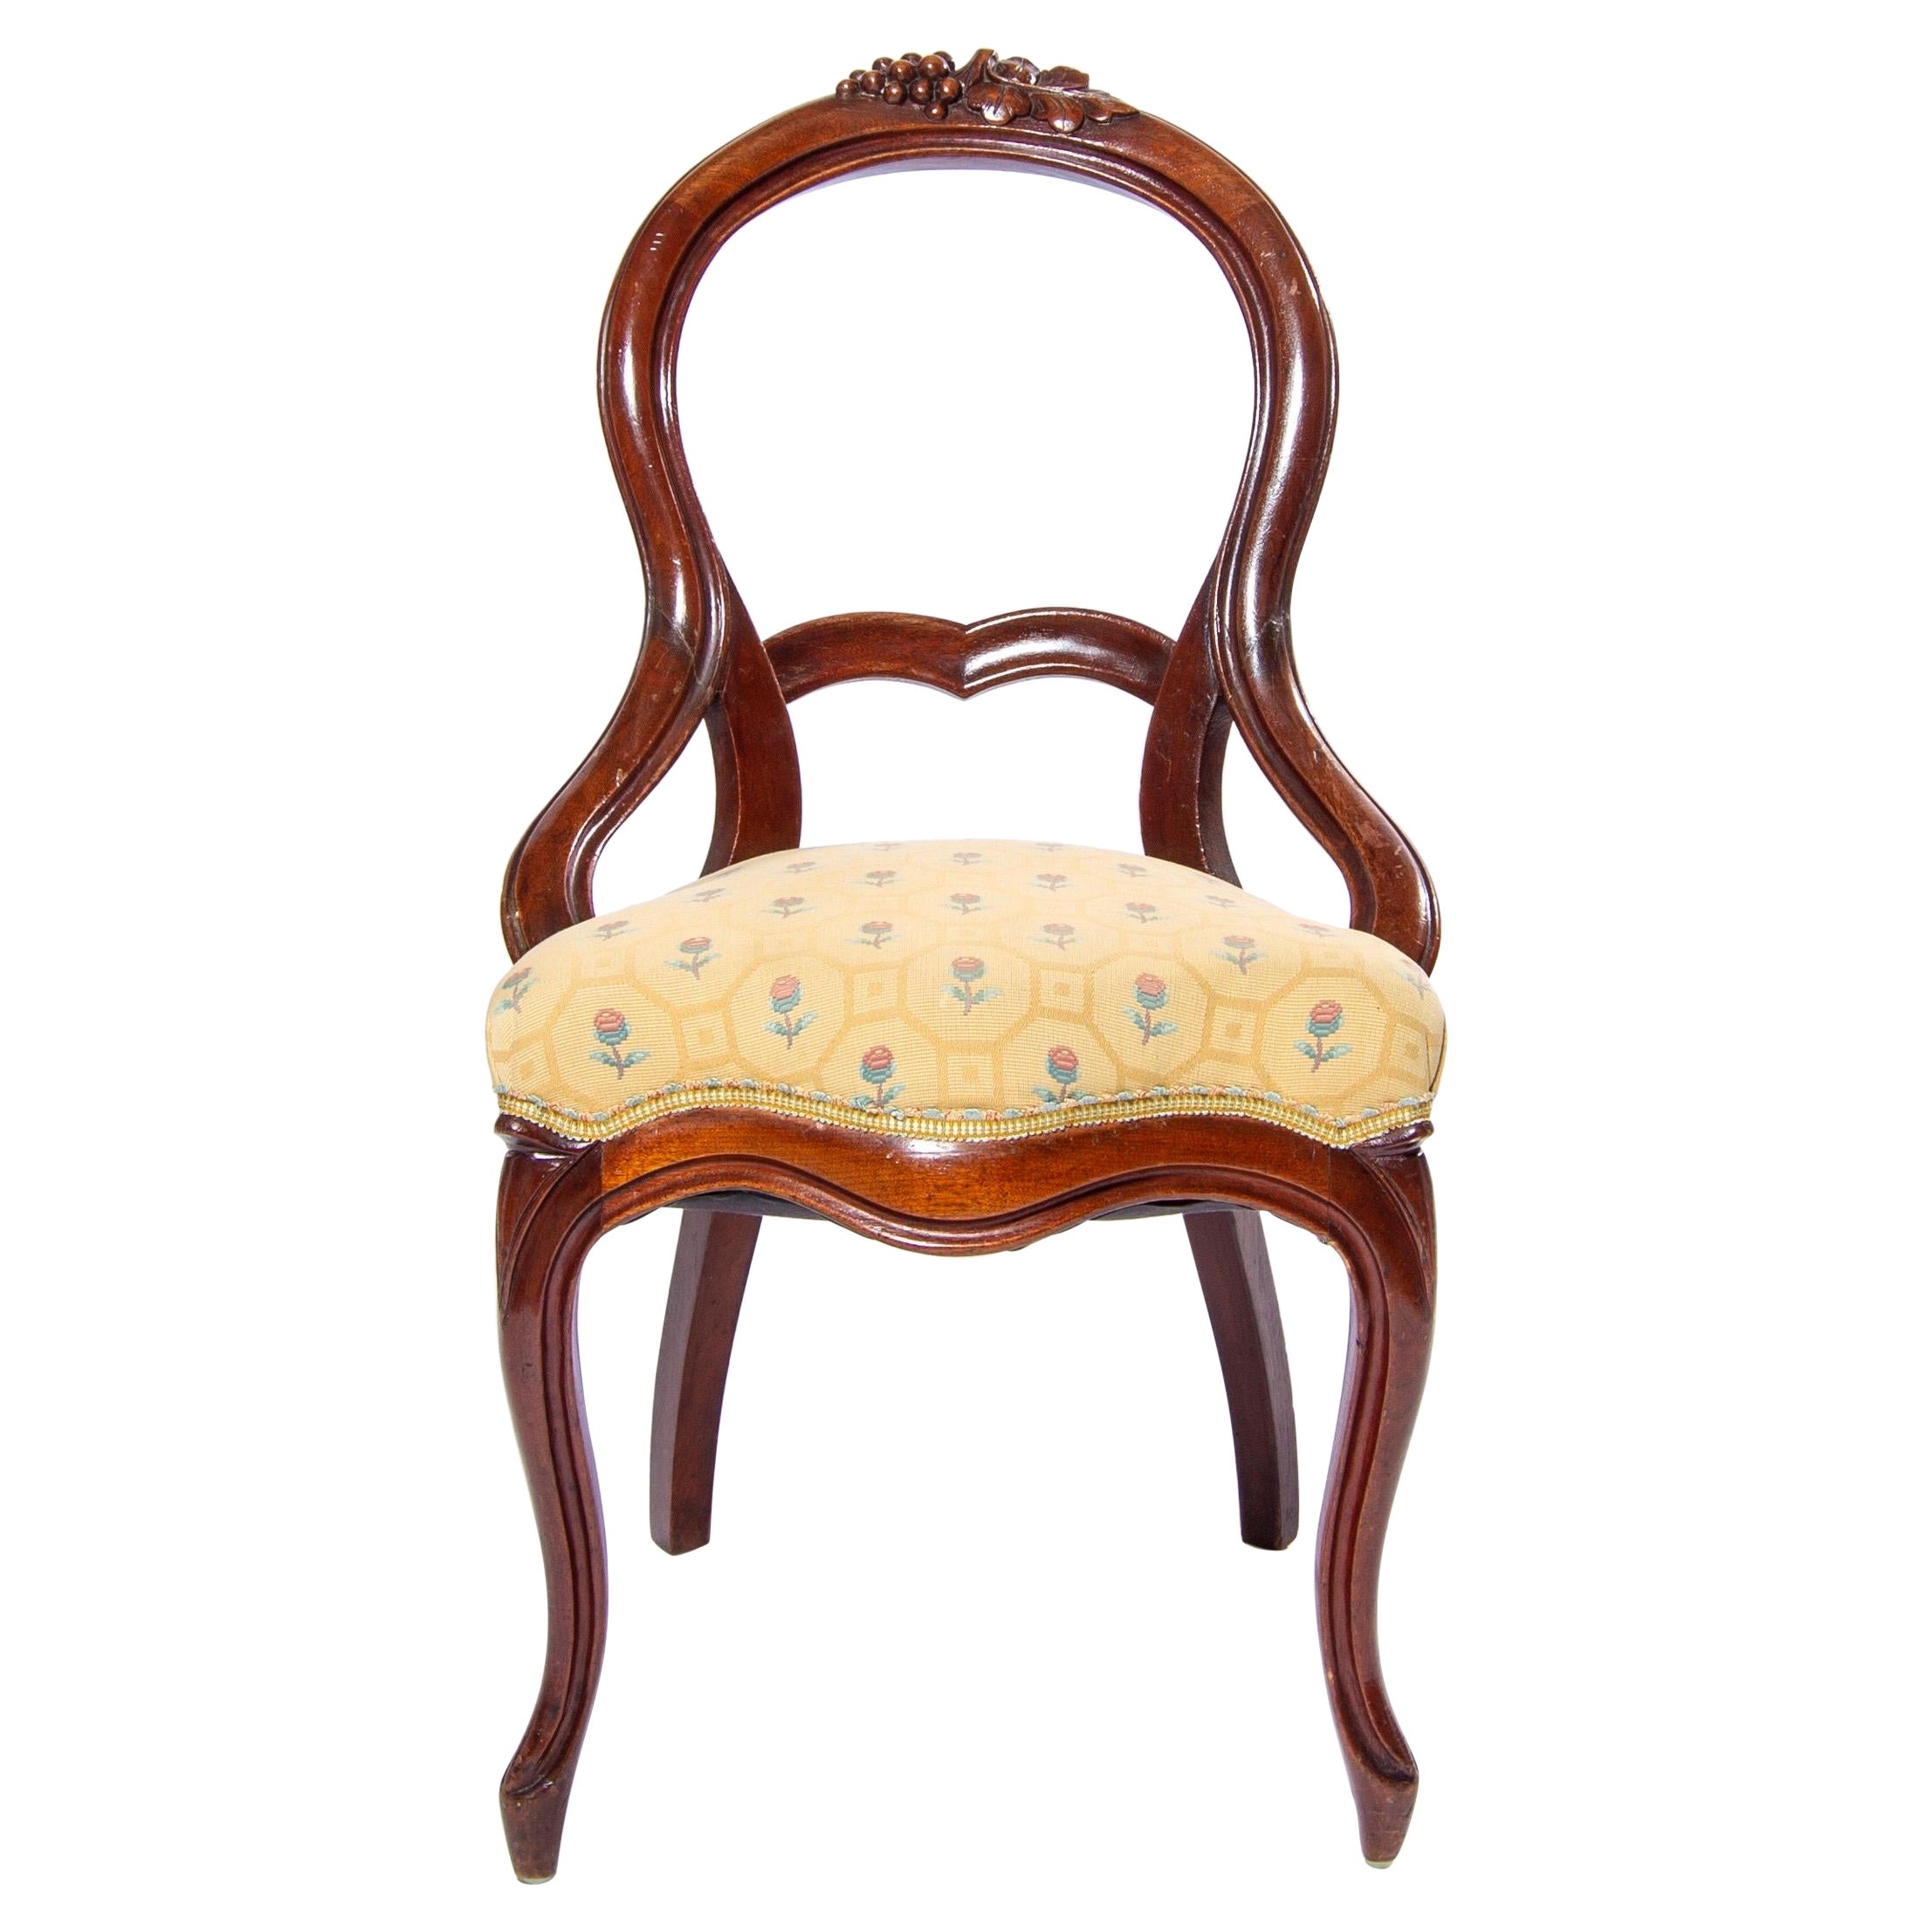 Hand Carved Walnut Queen Anne Chair with Grape motif, England